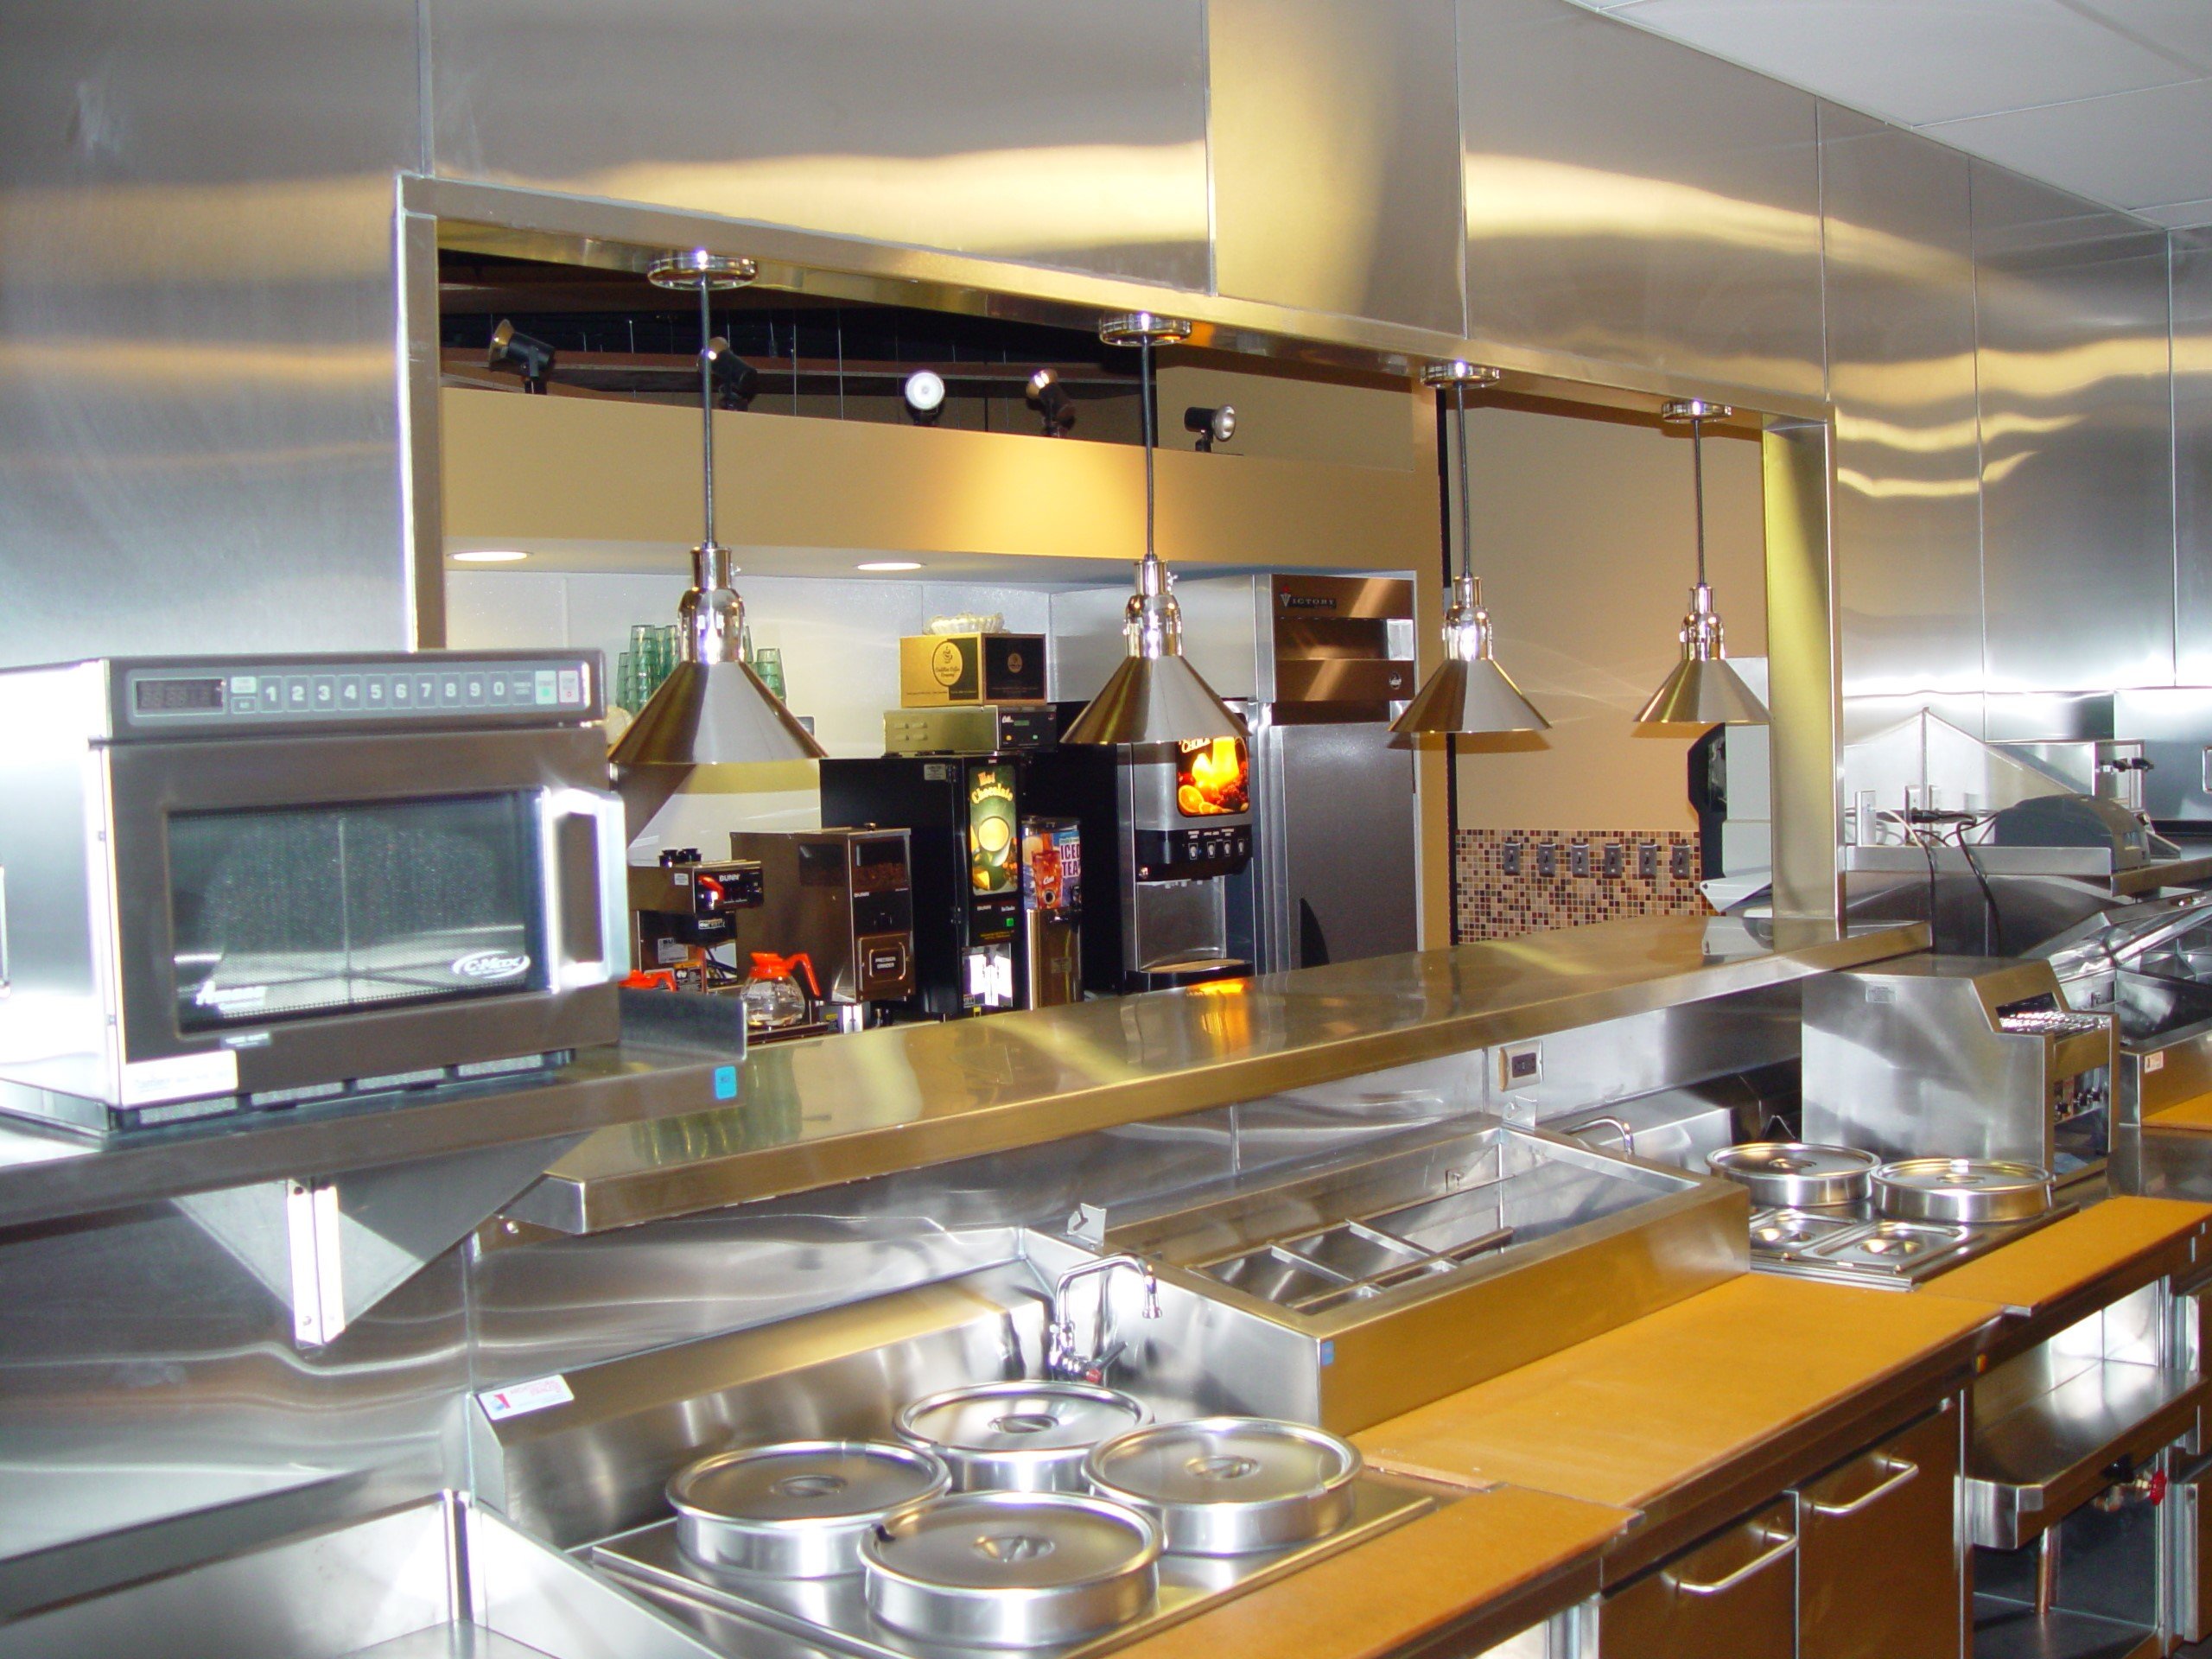 Stainless Steel Microwave Wall Shelves for Maximizing Space in